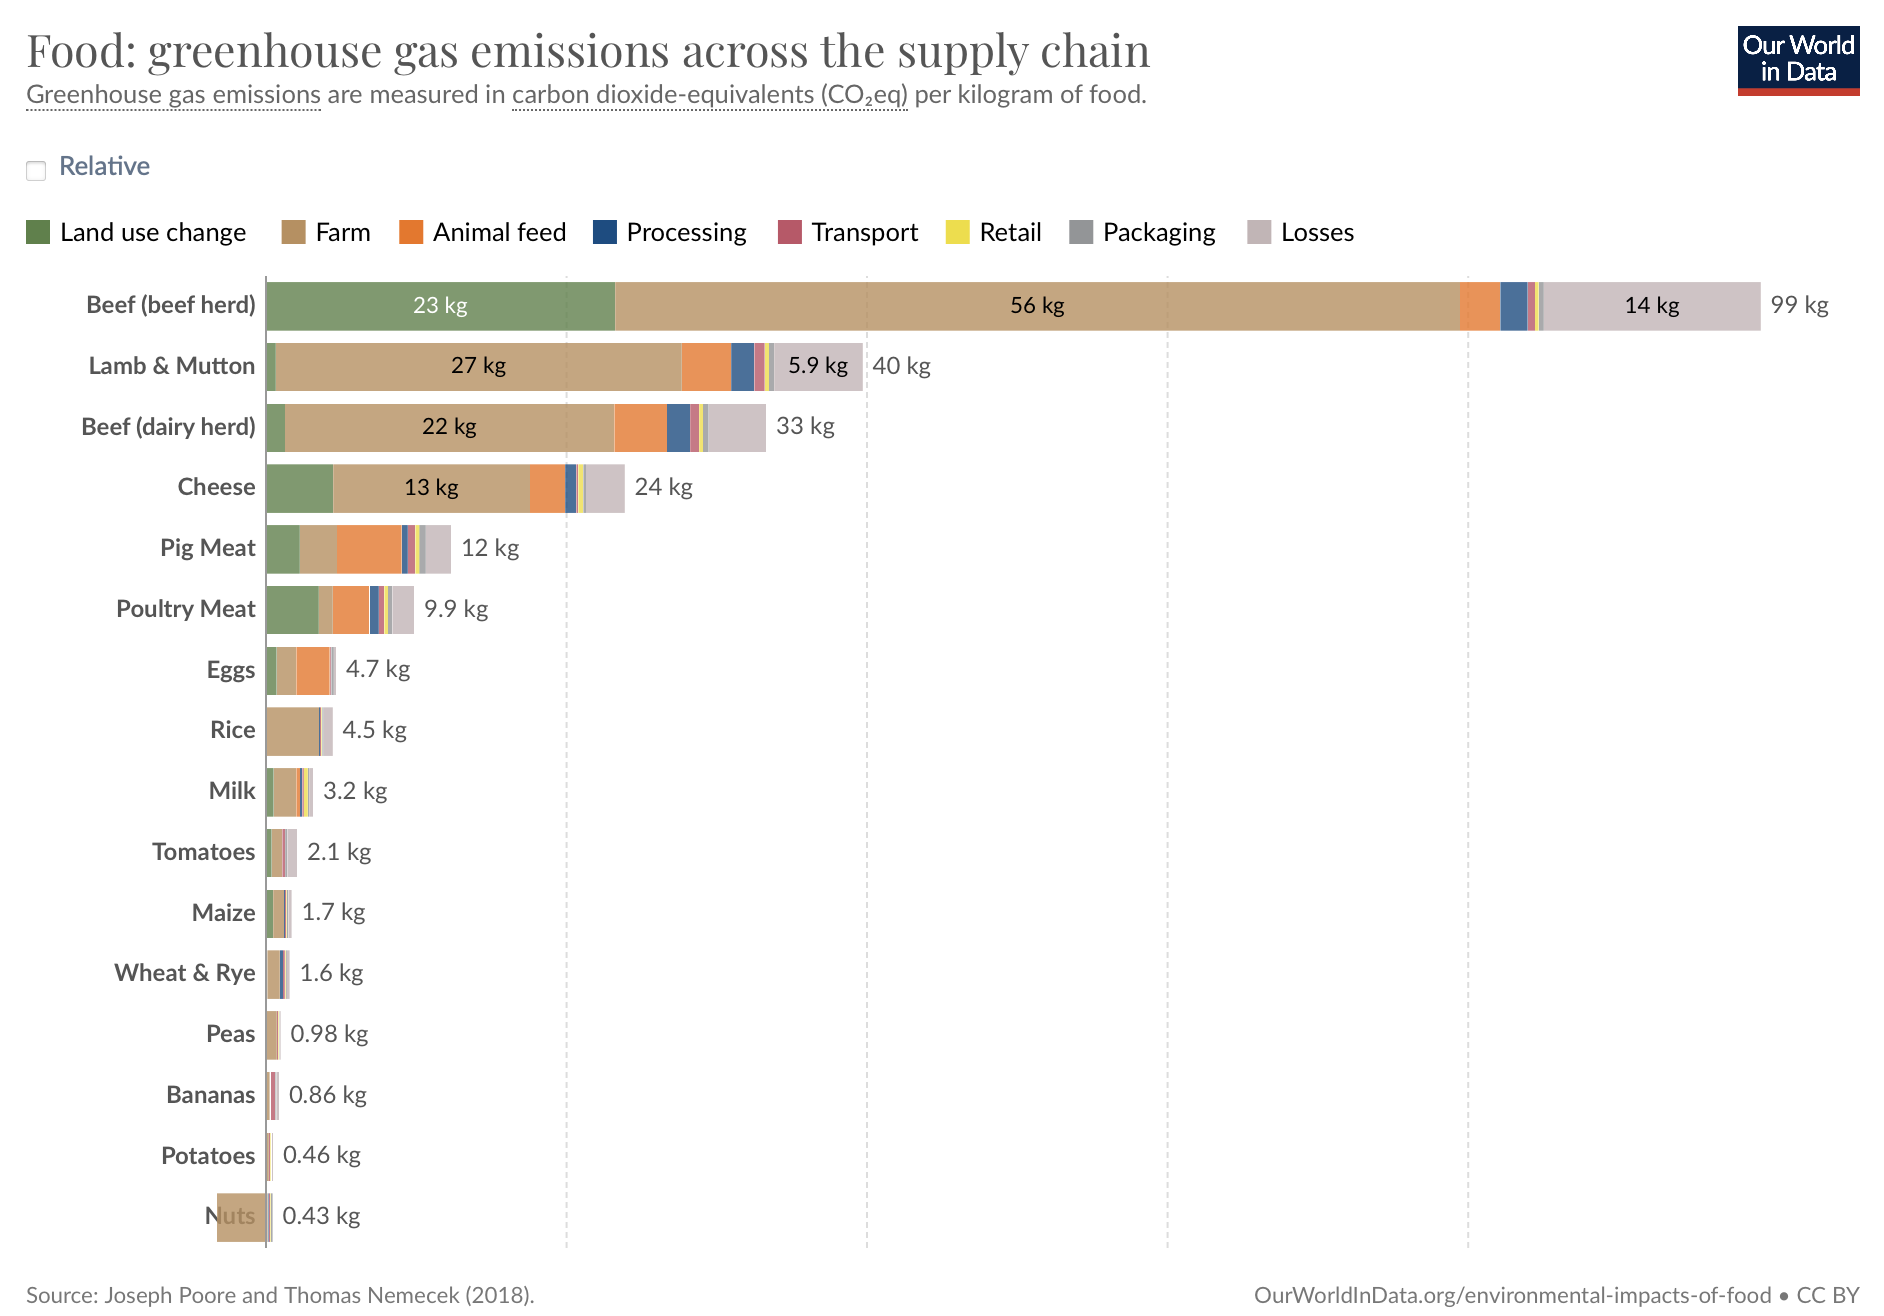 Food greenhouse gas emissions across supply chain